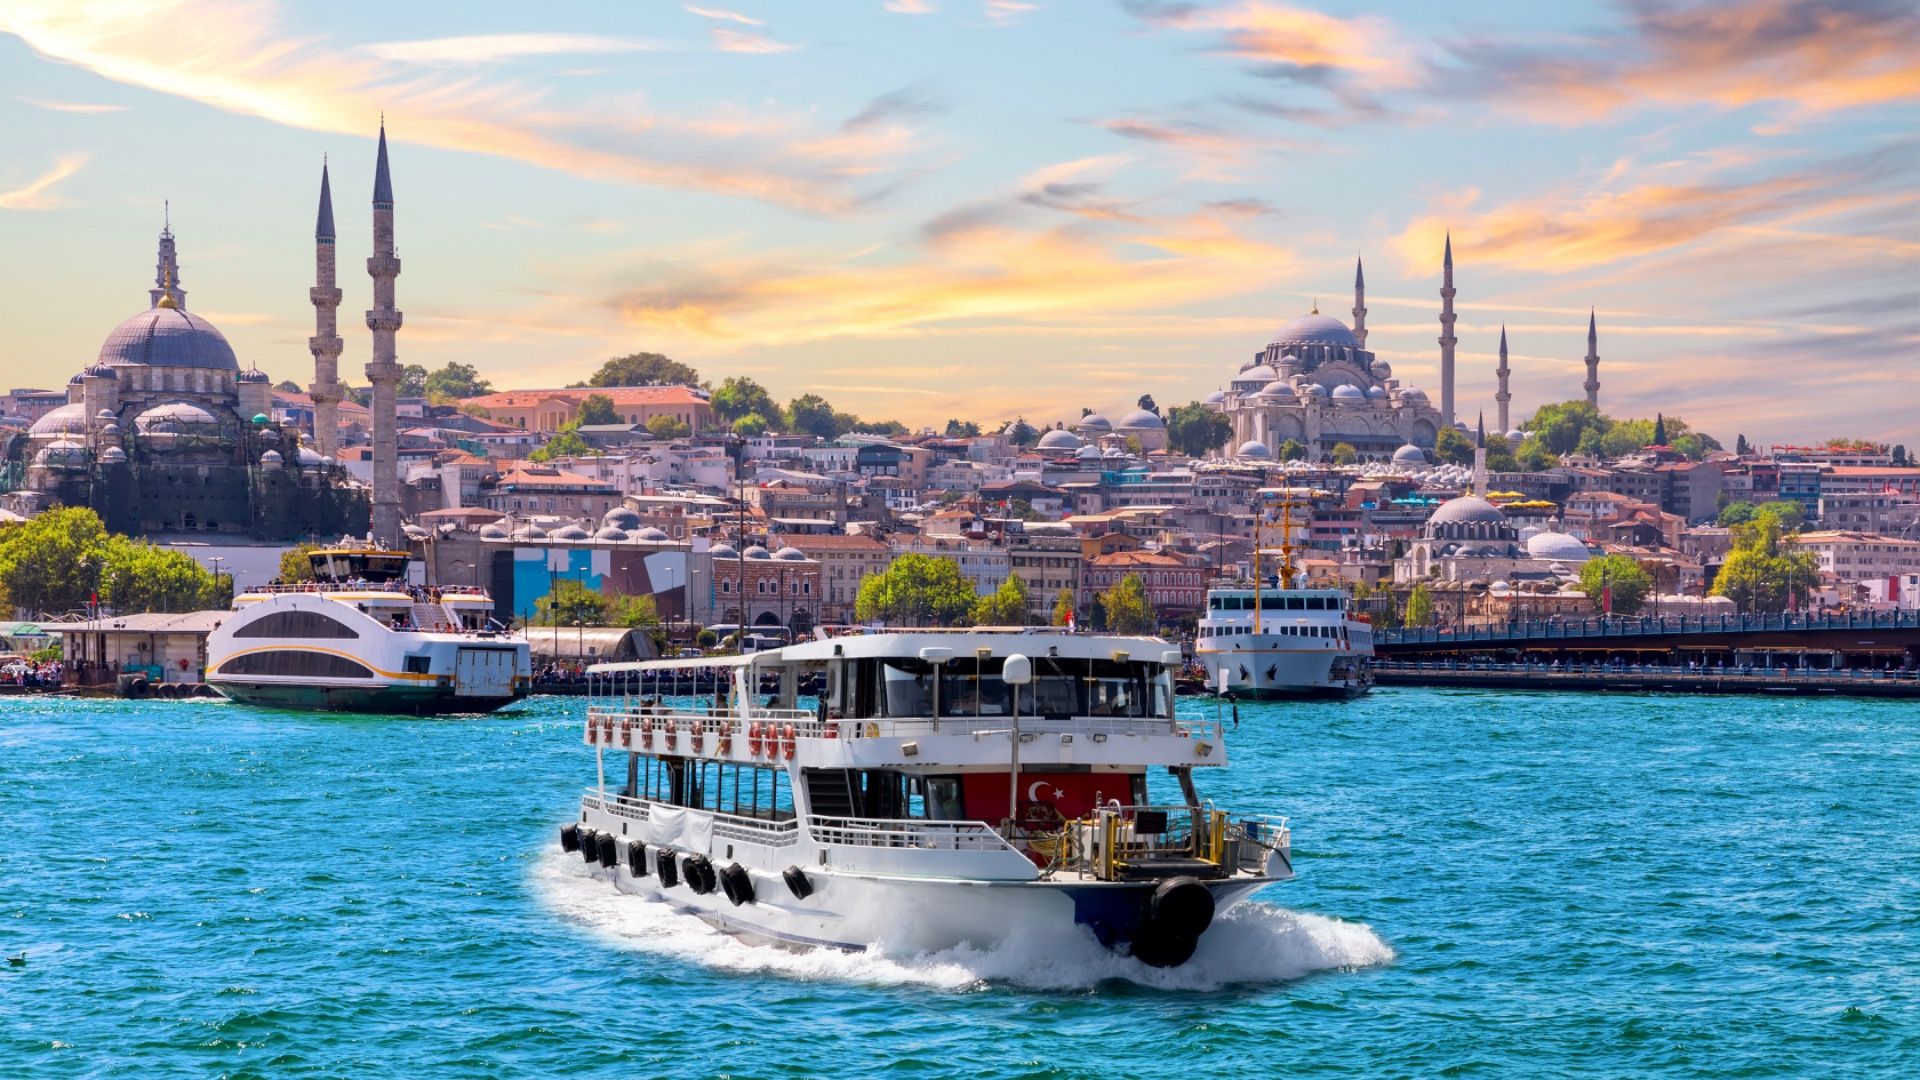 Famous Suleymaniye and Rustem Pasha Mosques and the cruise boat on the Bosphorus